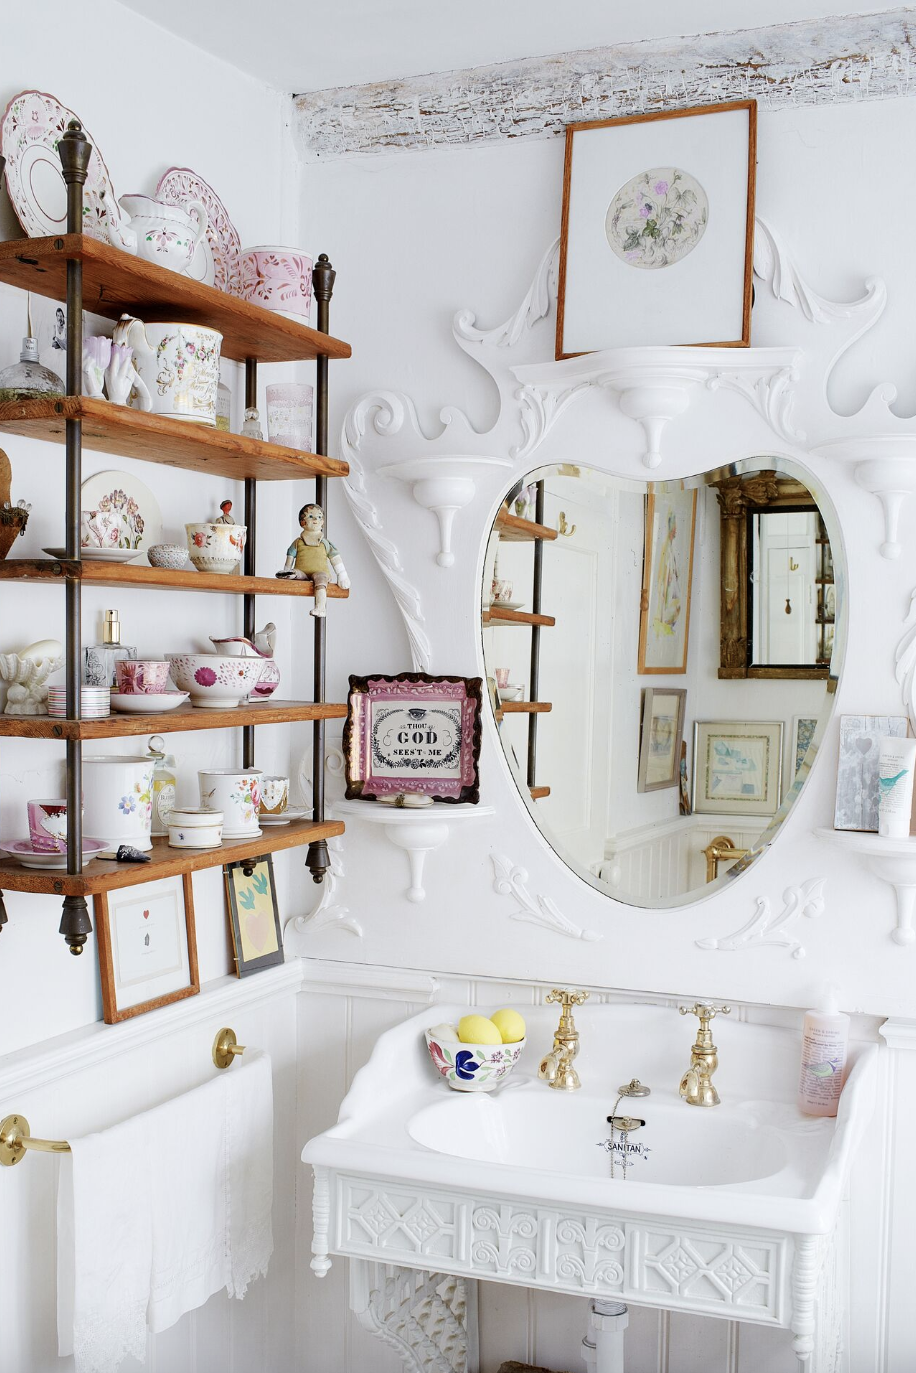 bathroom shelf ideas, white victorian style bathroom with rustic wall mounted shelving for teacups